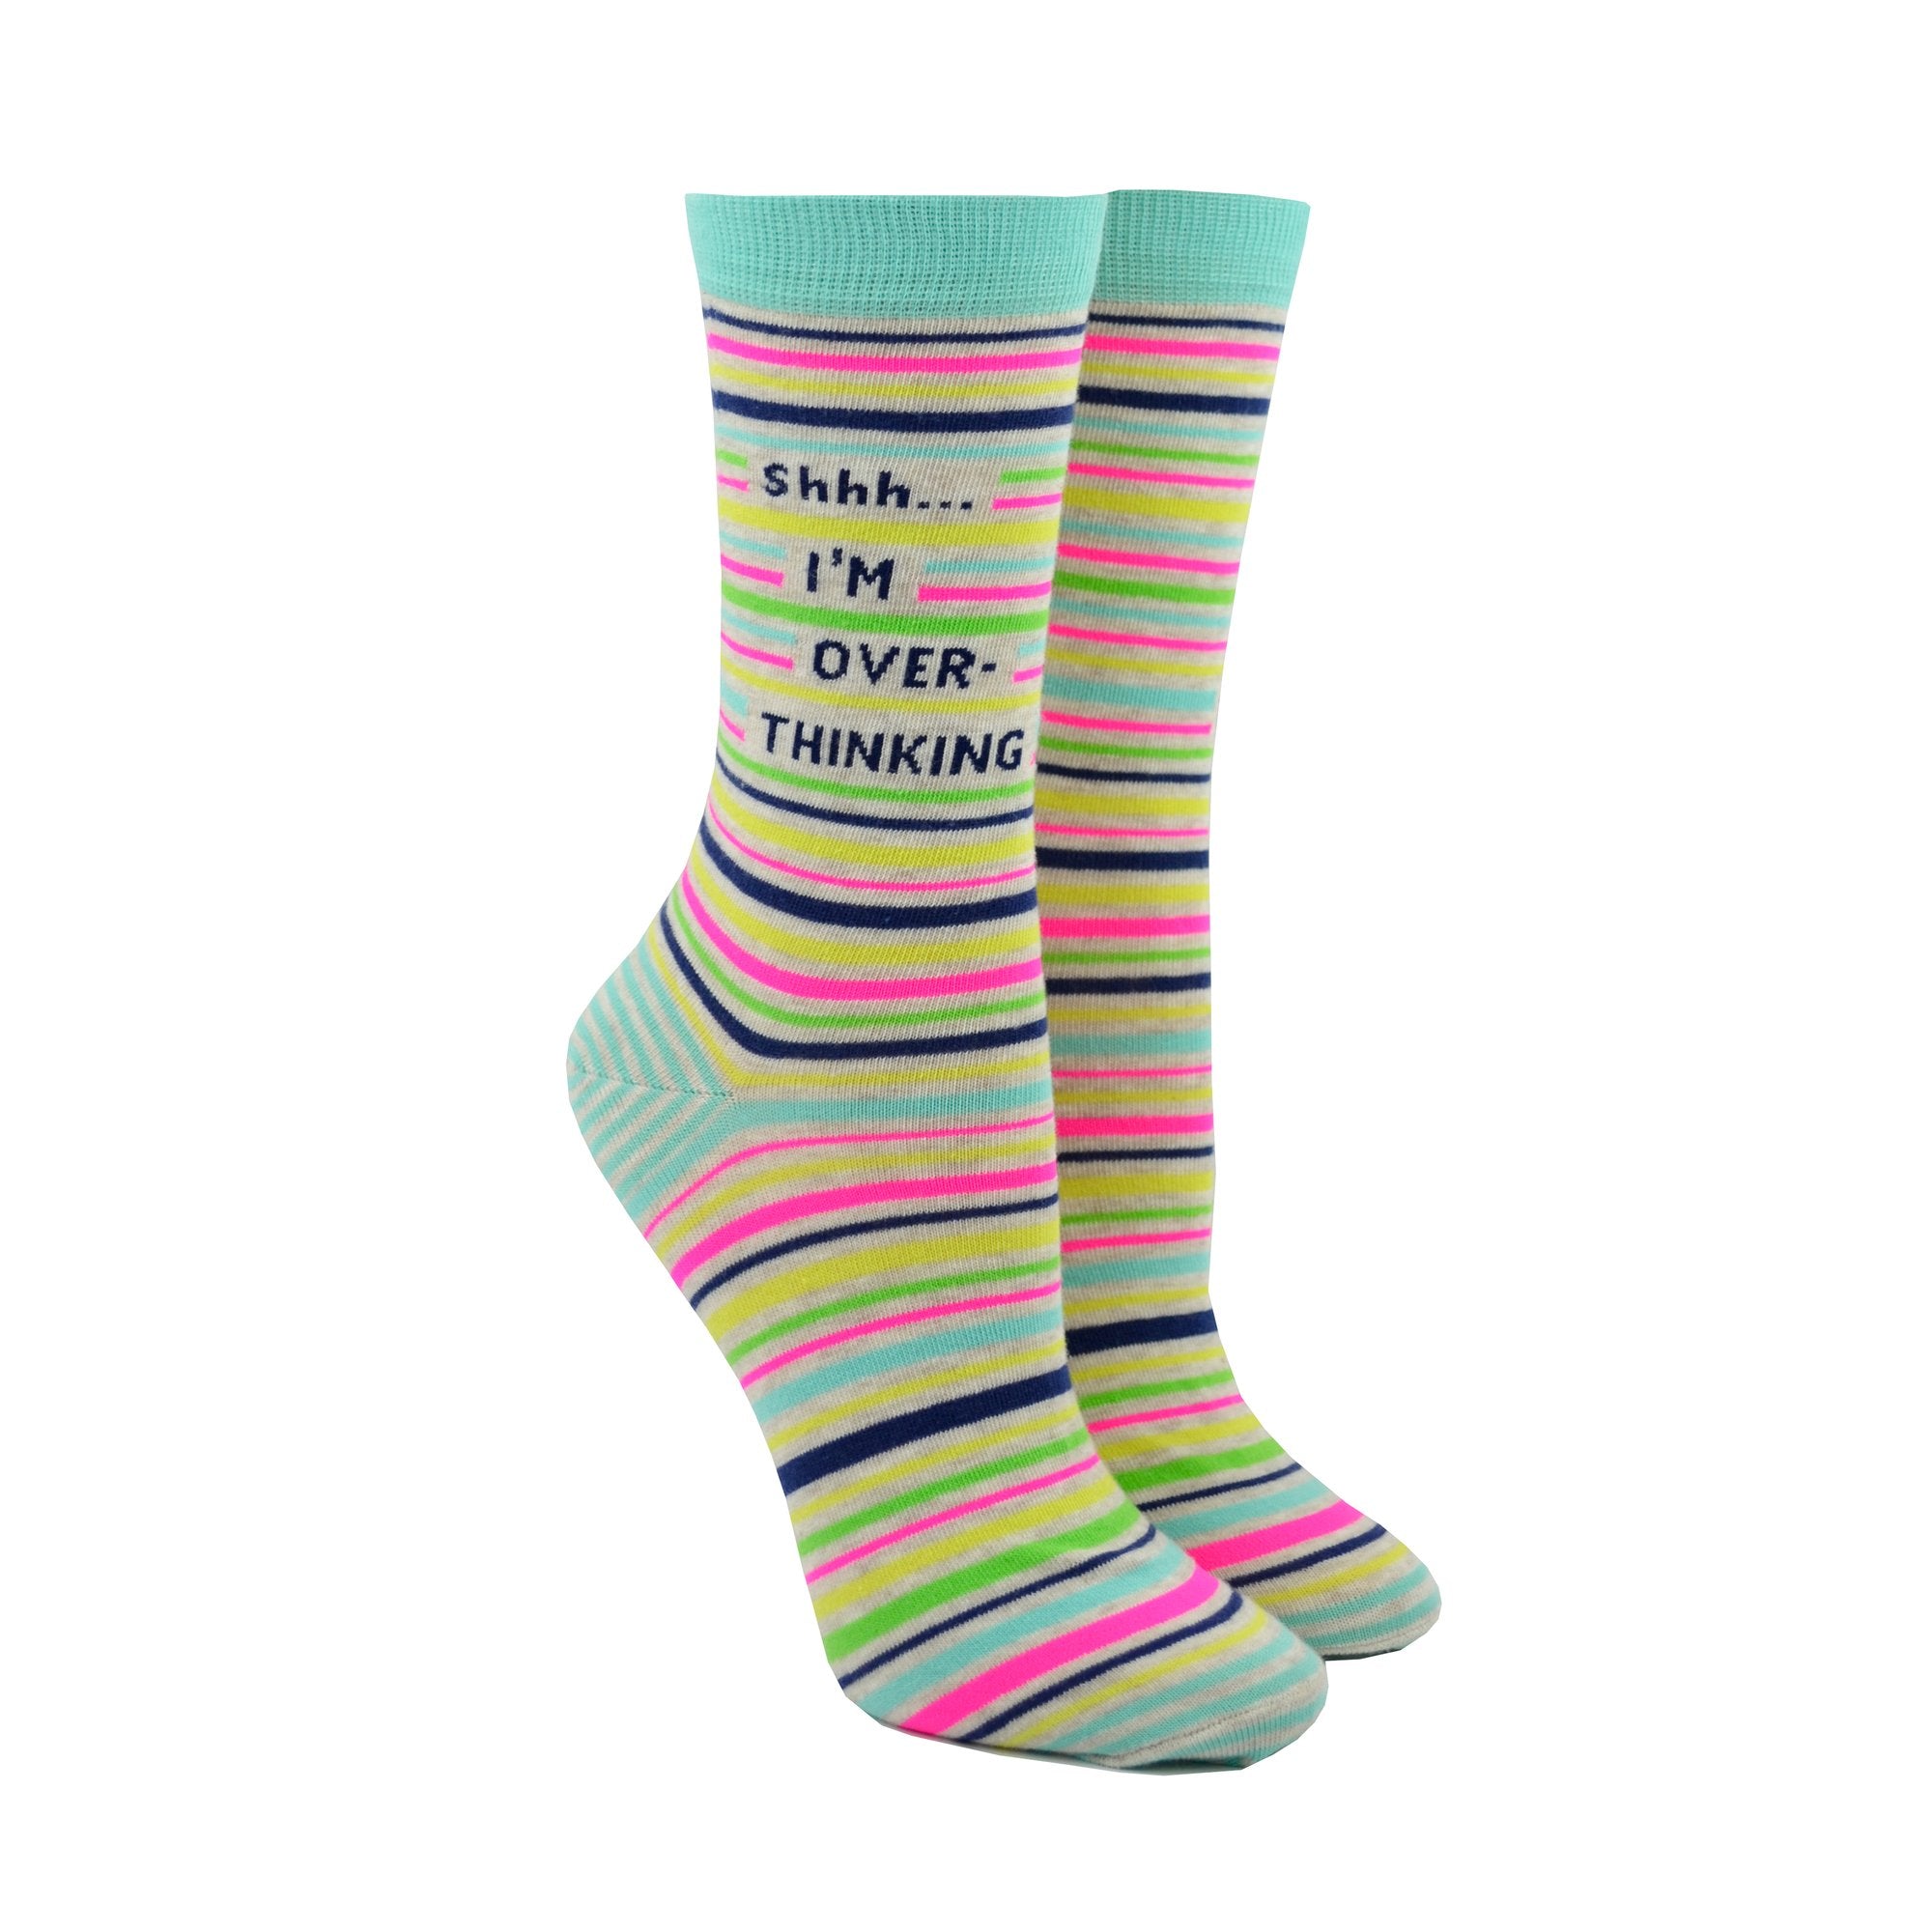 socks with multicolour mini stripes that say shhh...i'm over-thinking